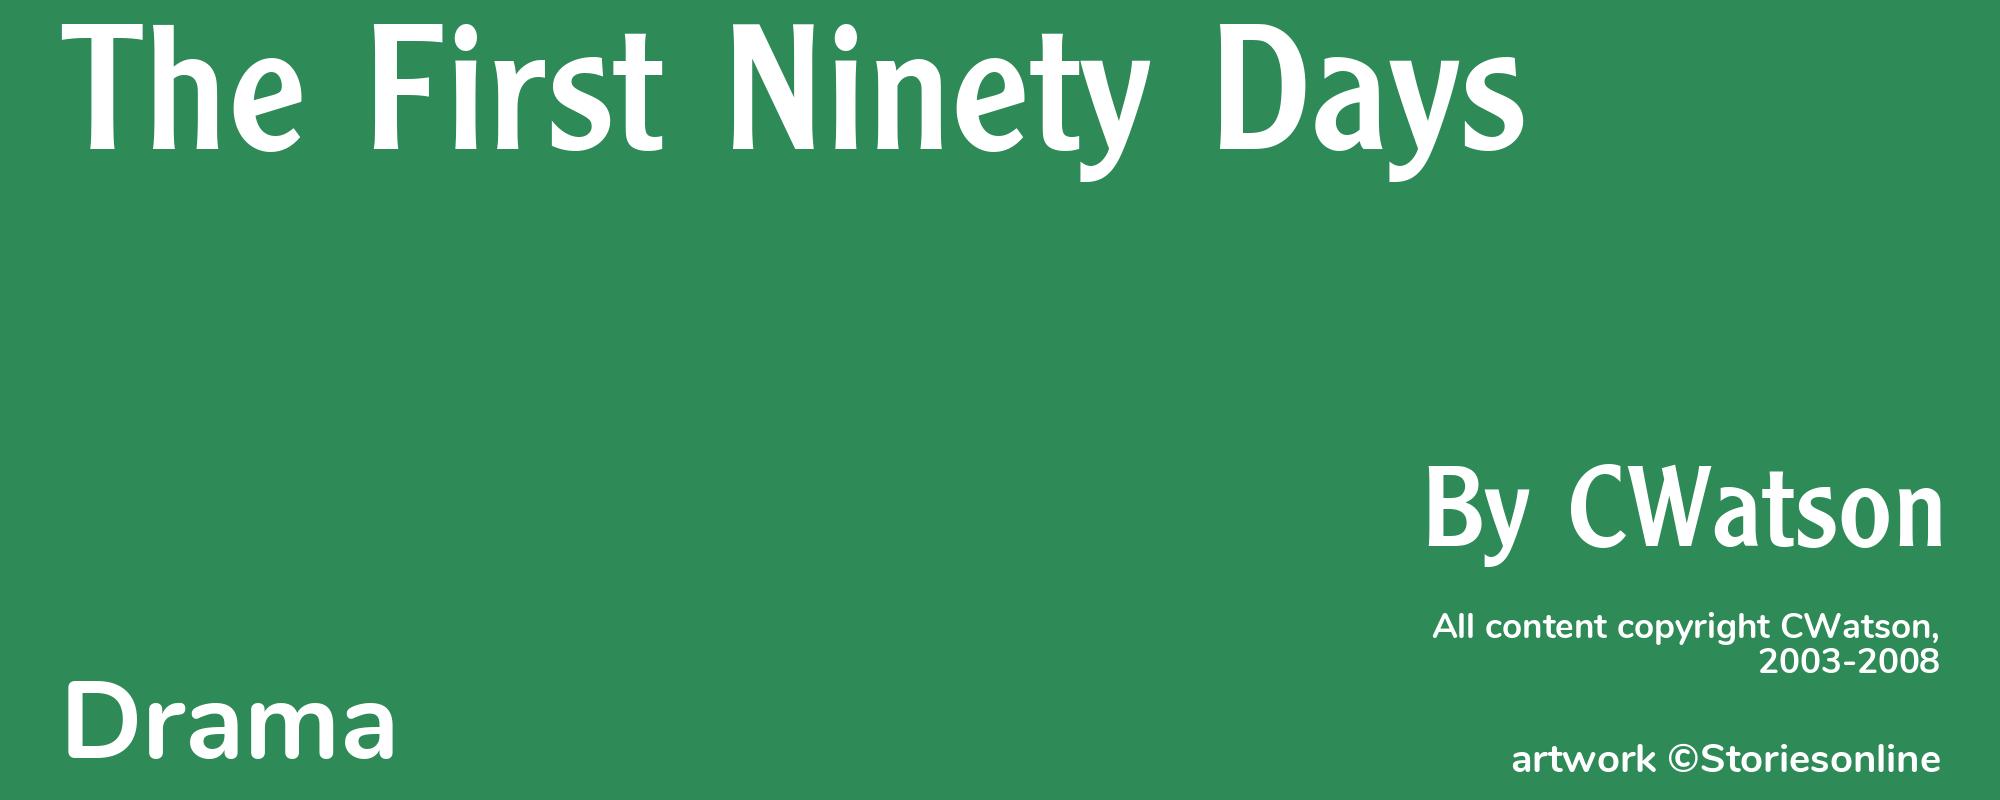 The First Ninety Days - Cover